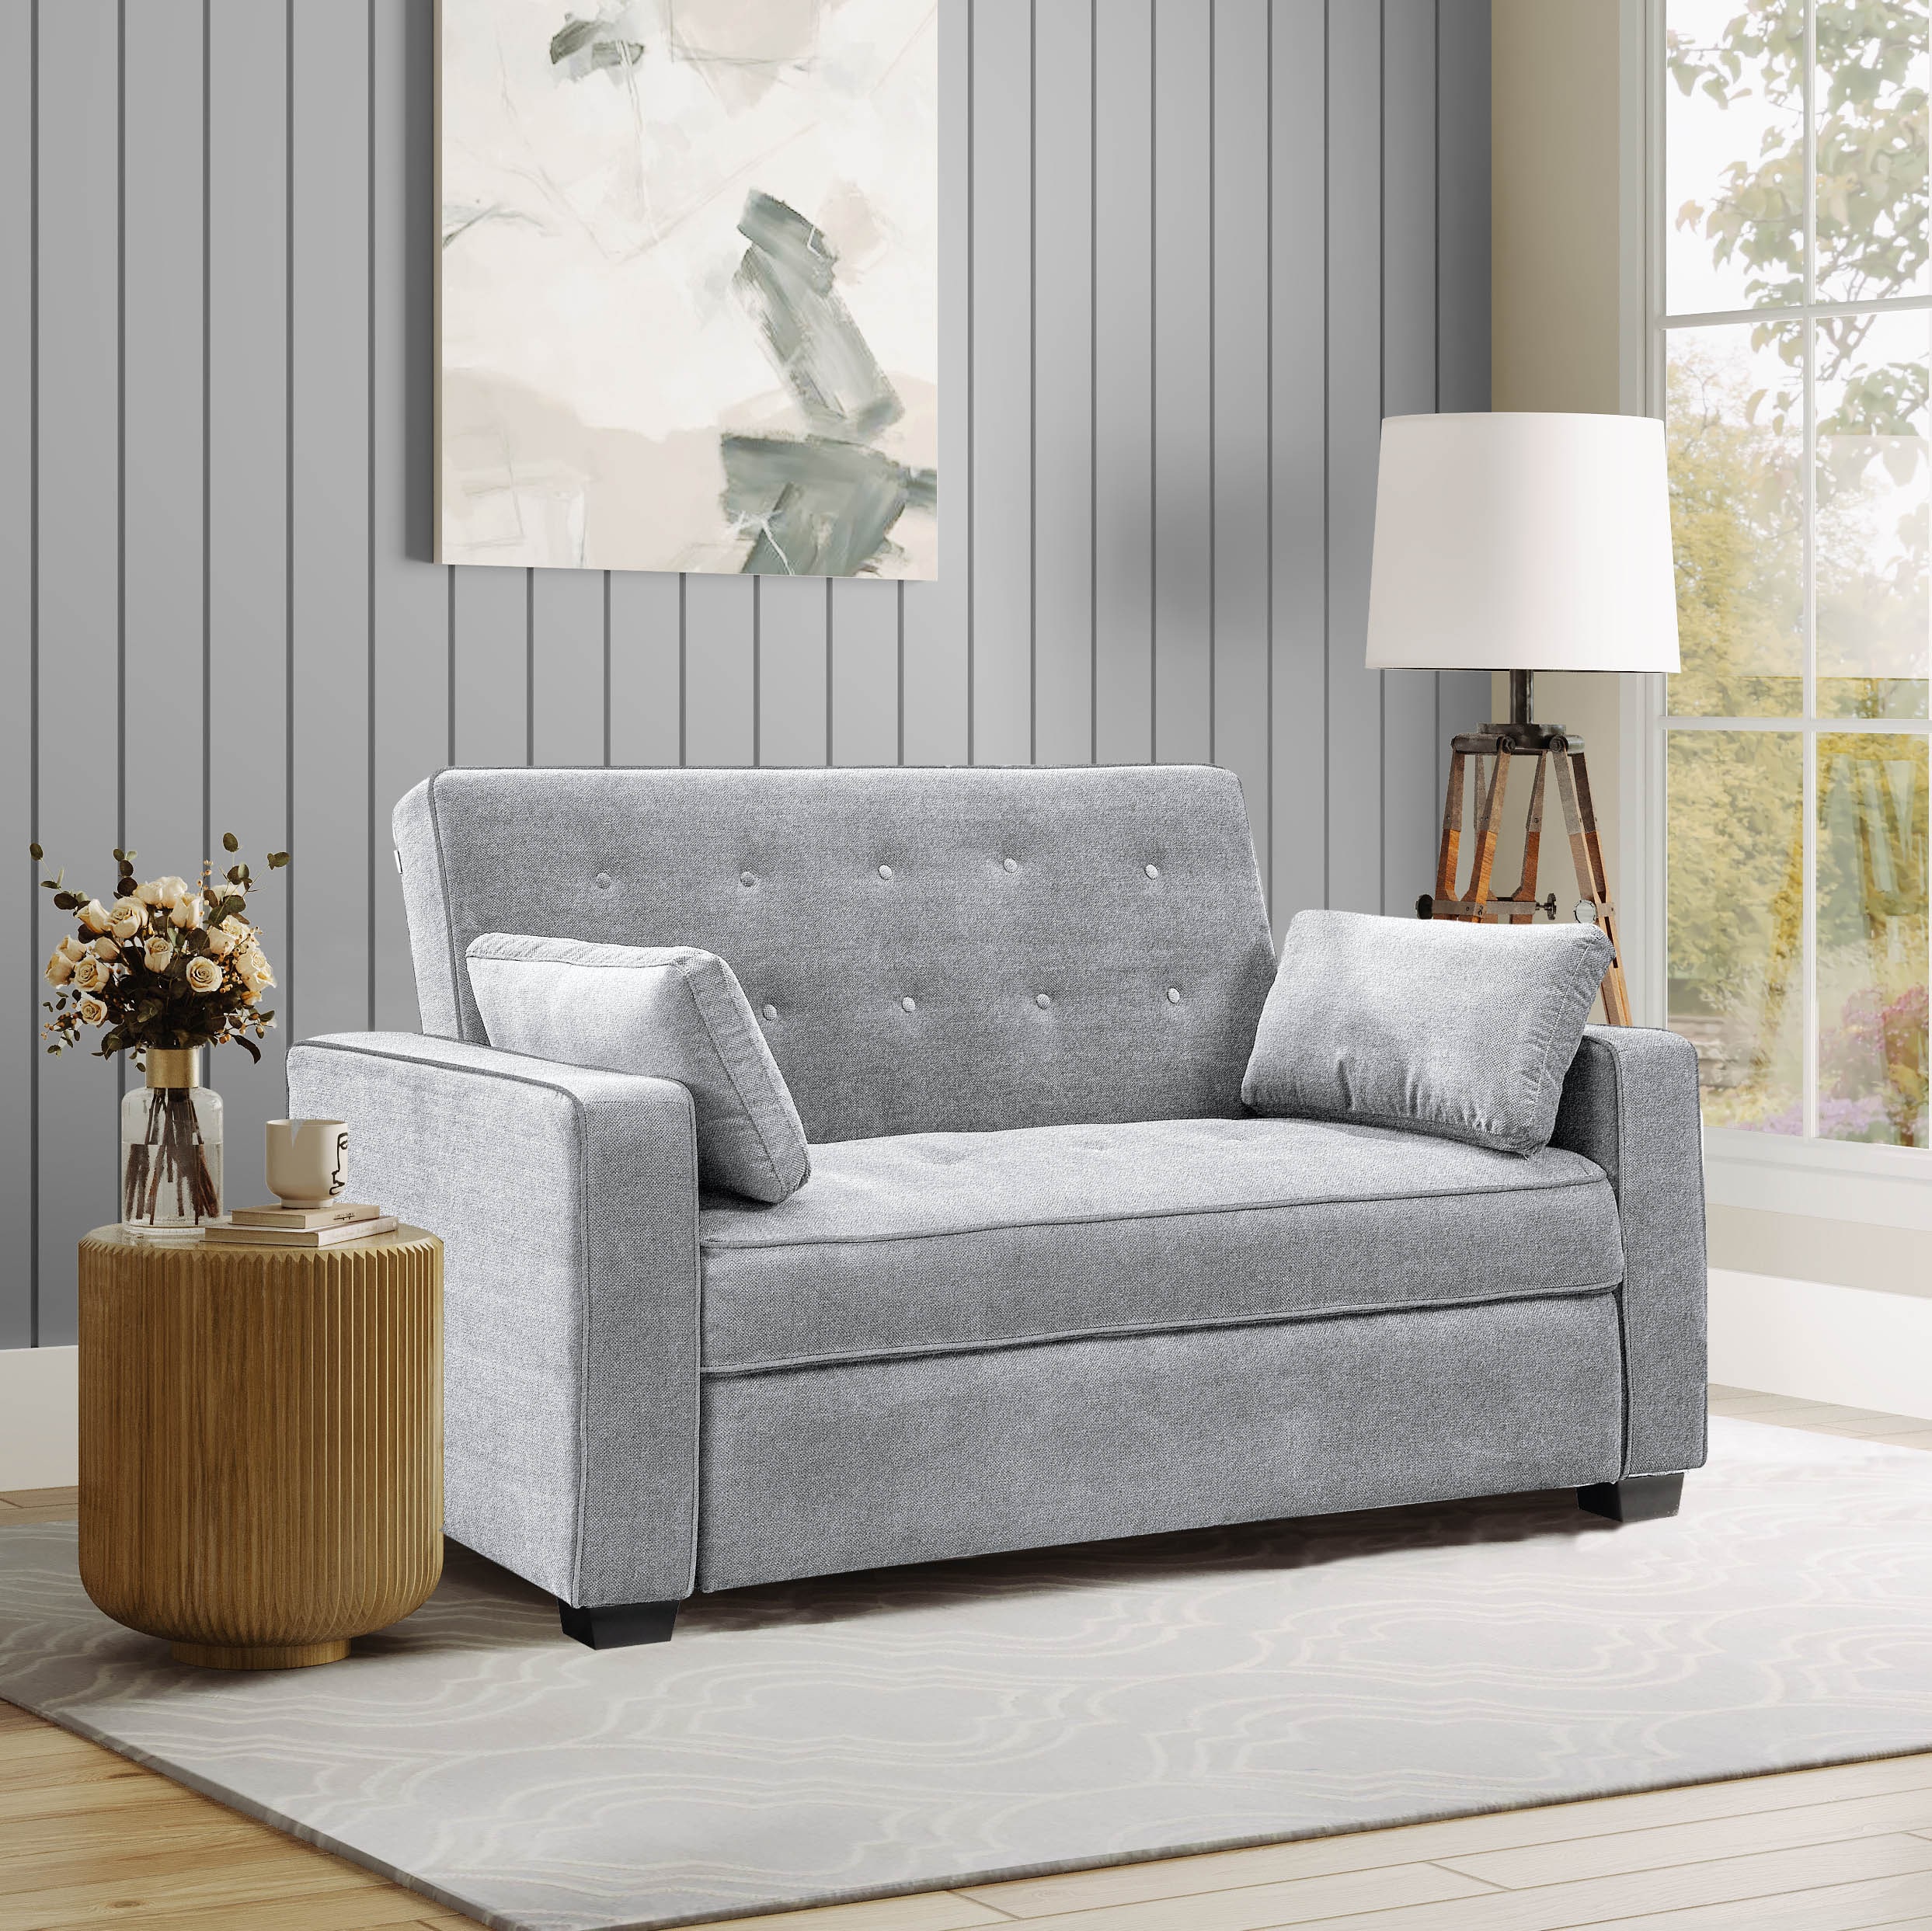 at Polyester/Blend Grey & Couches, department Arya Sofa Serta 66.5-in Light Modern the in Sofas Loveseats 2-seater